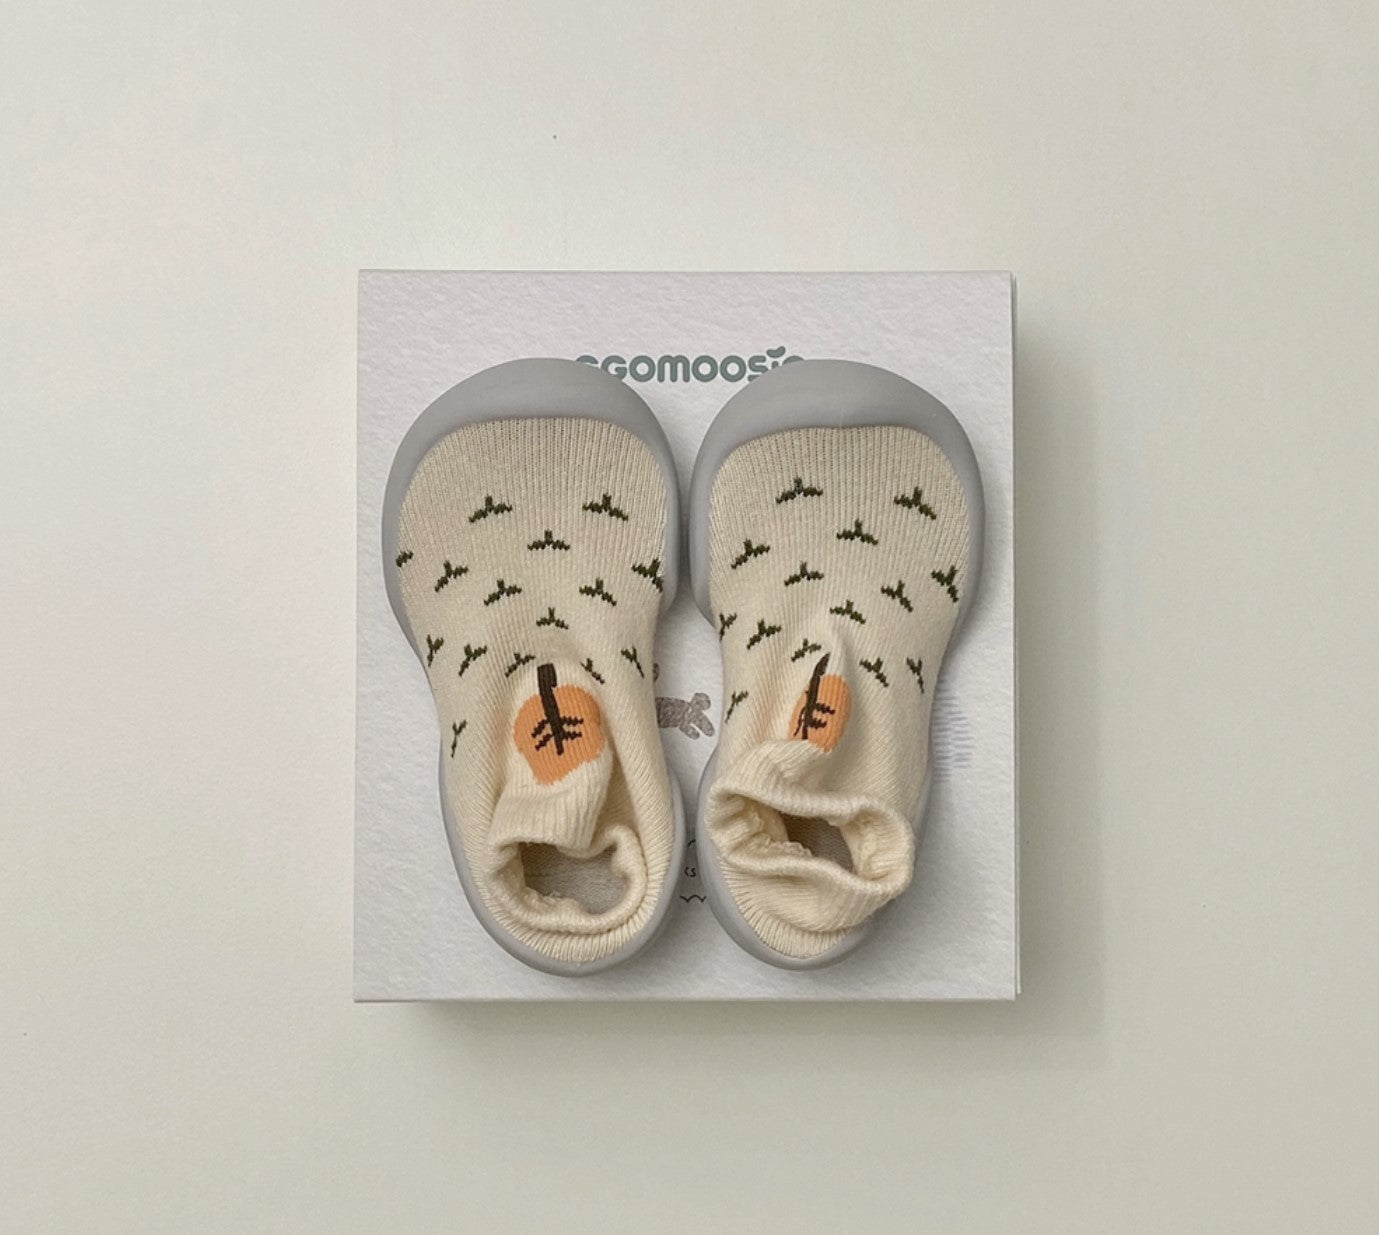 Little Forest Baby First Walking Shoes: Elastic baby shoes with honeycomb outsole for slip resistance. Gentle flex for delicate baby foot cartilage, lightweight design for growth and learning to walk.